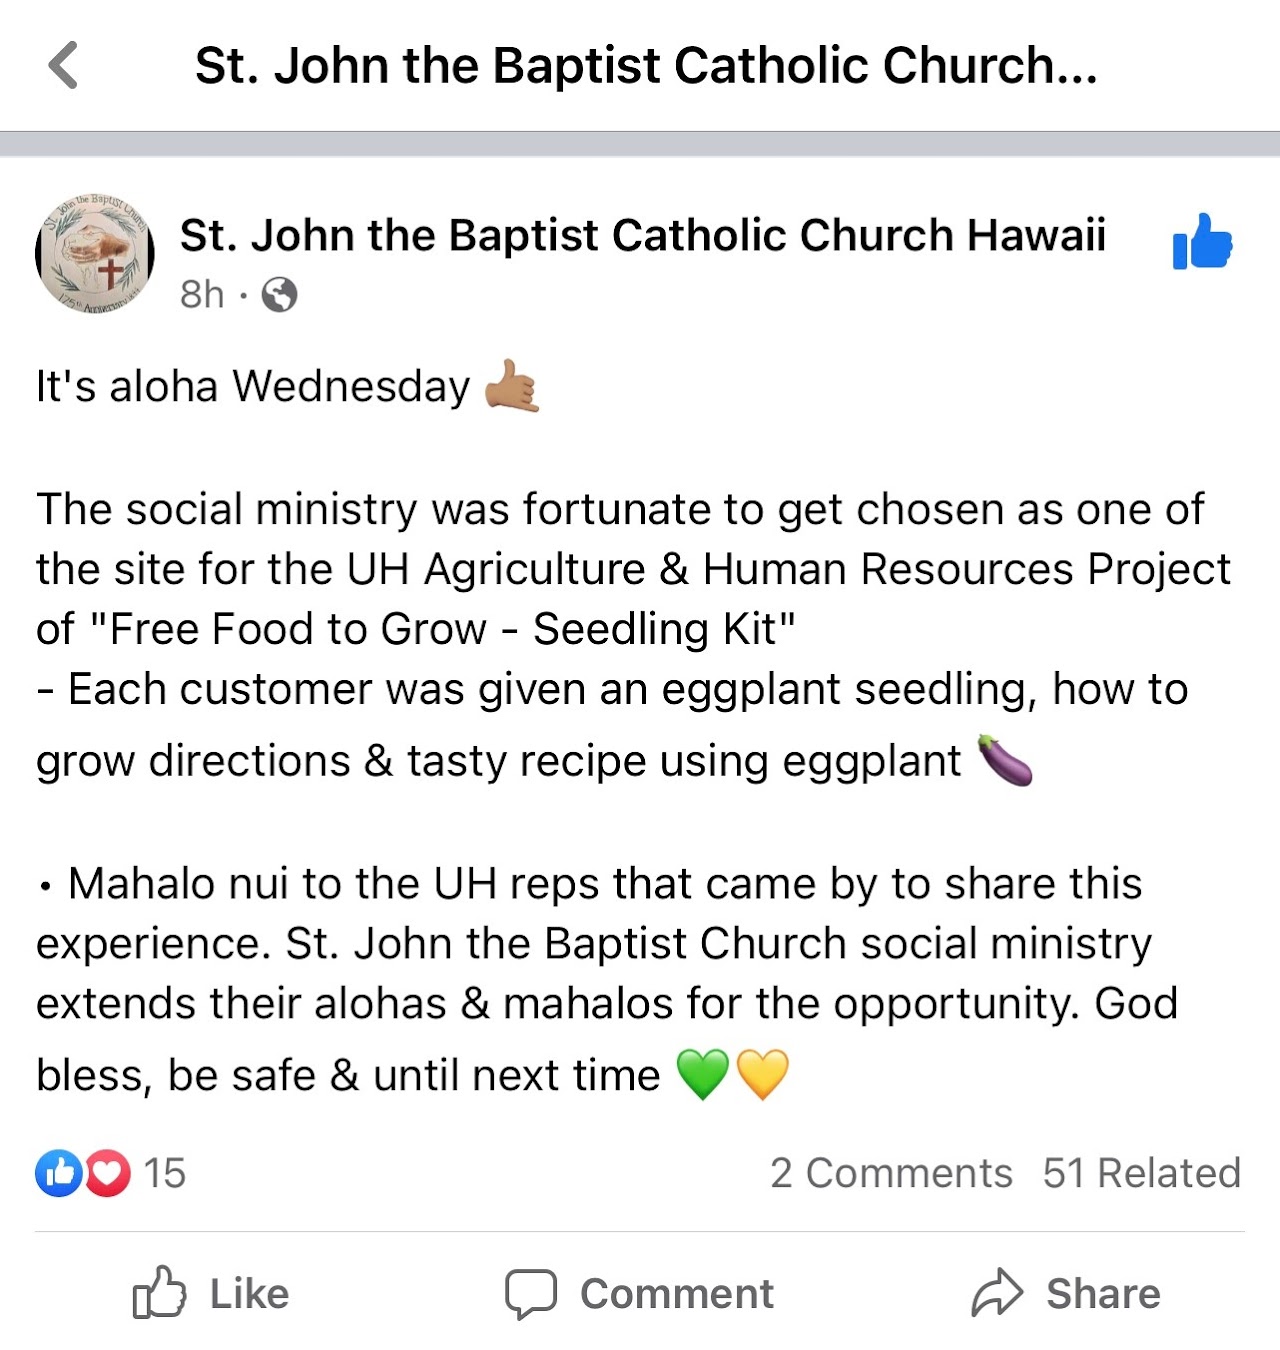 From Facebook post: "St. John the Baptish Catholic Church Hawaii. It's aloha Wednesday (shaka emoji). The social ministry was fortunate to get chosen as one of the site for the UH Agriculture & Human Resources PRoject of "Free Food to Grow - Seedling Kit". Each customer was given an eggplant seedling, how to grow directions & tasty recipe using eggplant (eggplant emoji). Mahalo nui to the UH reps that came by to share this experience. St. John the Baptist Church social ministry extends their alohas and mahalos for the opportunity. God bless, be safe & until next time (green heart emoji, yellow heart emoji)"